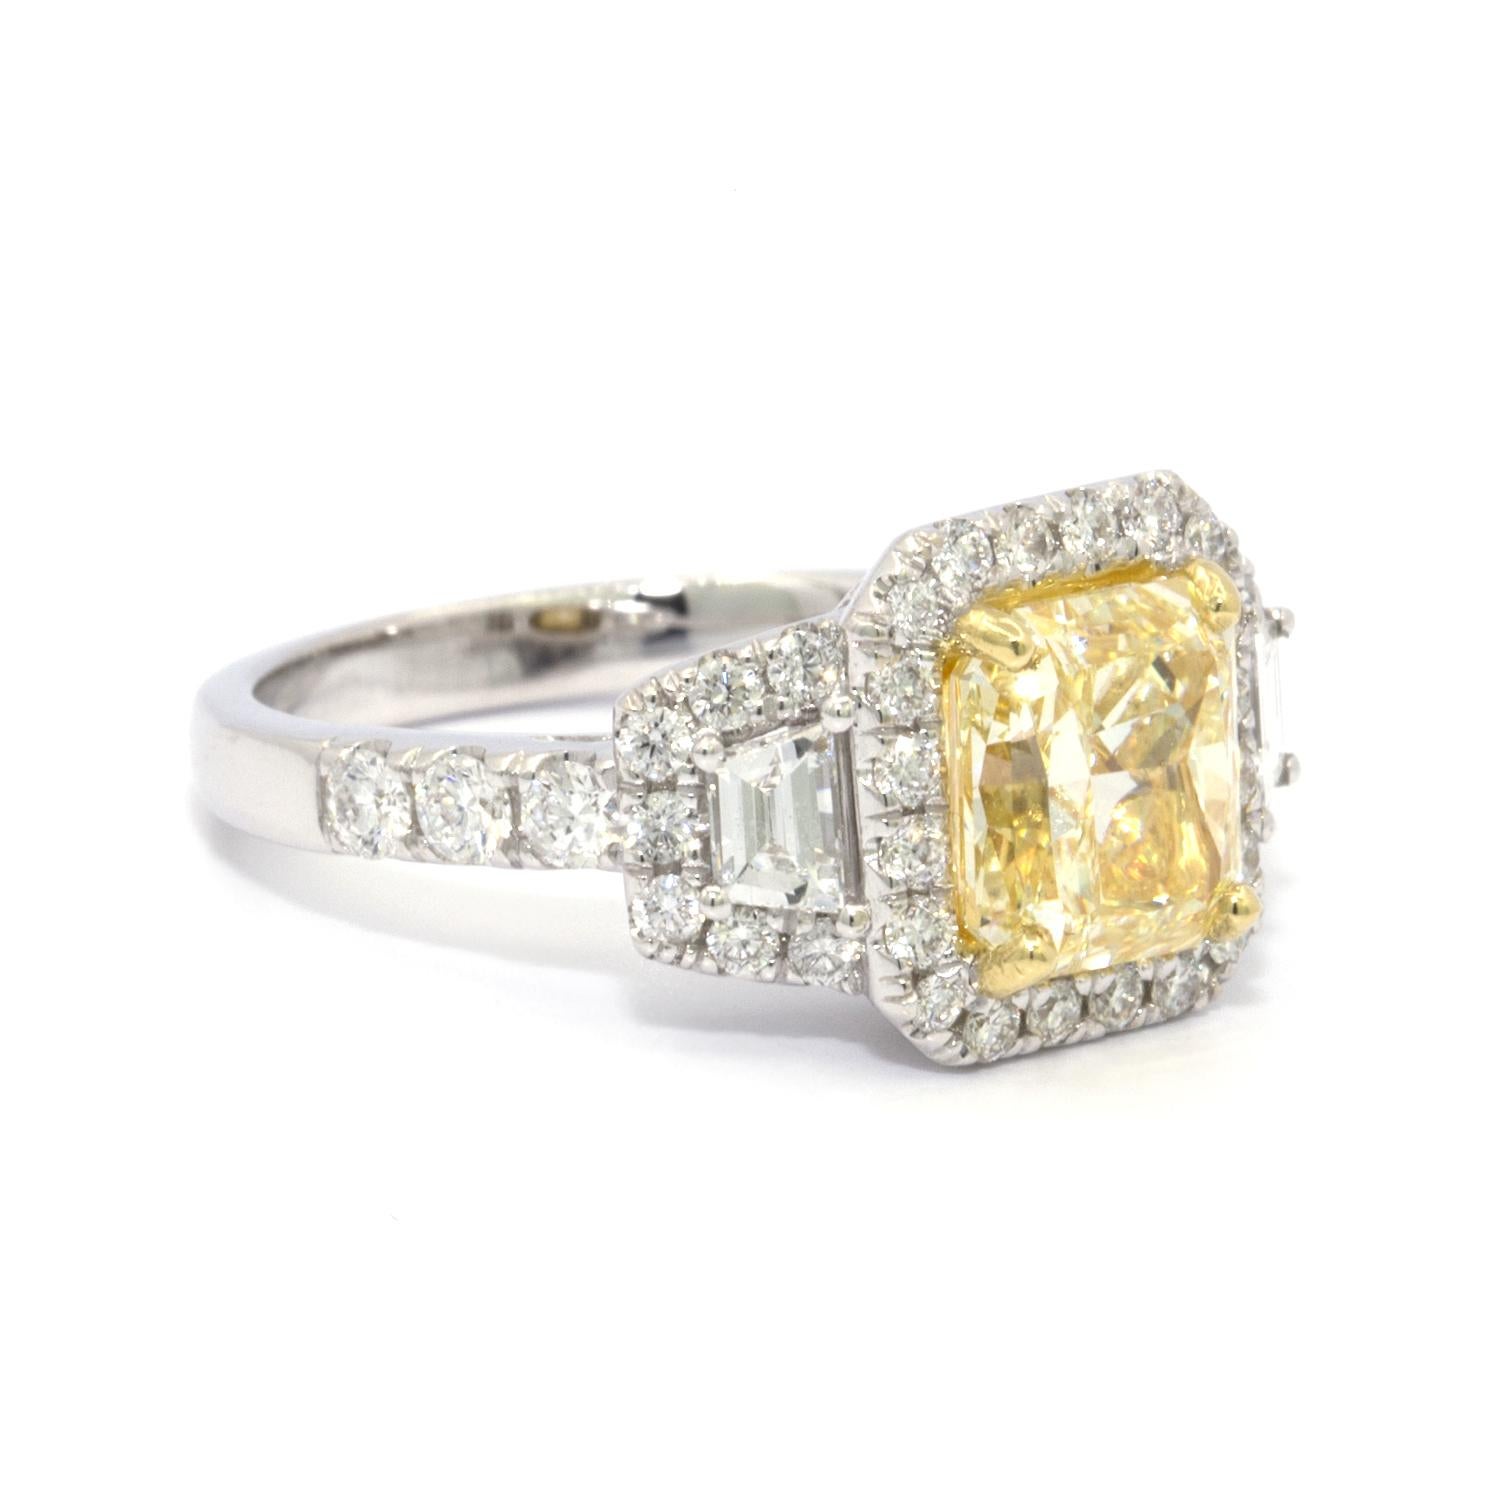 GIA Certified 2.39 ct Radiant Cut Fancy Yellow Diamond Ring set in a 18k white gold  that has been stamped stamped Ed.B. This filigree white gold ring is set with 26 RBC and 2 trapezoid shaped white diamonds that weigh approximately 1.16 cts.. The